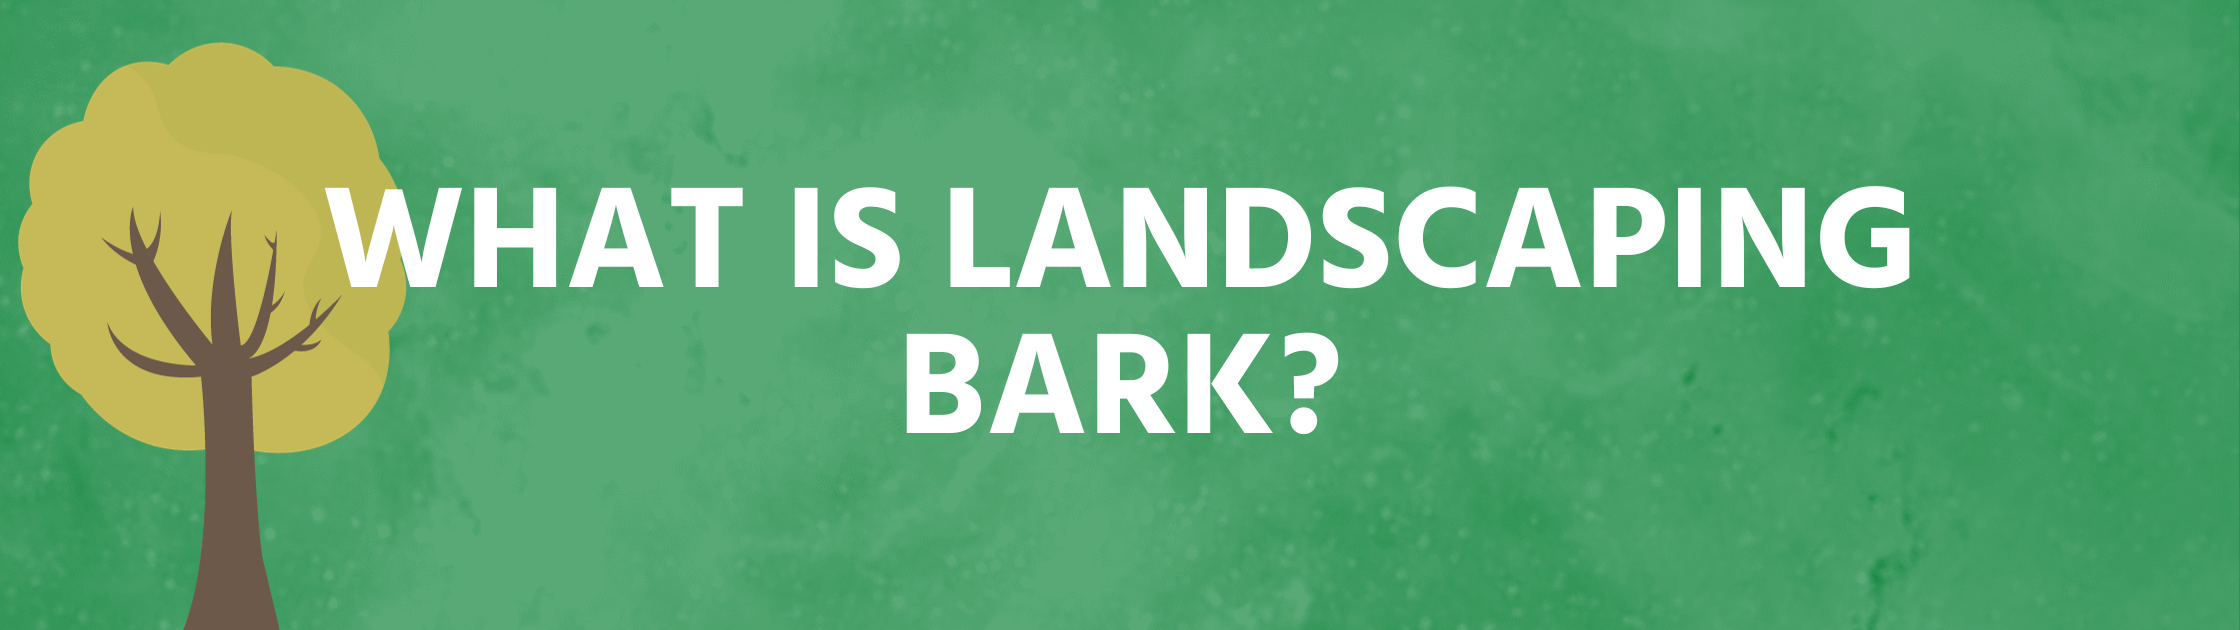 What is Landscaping Bark?